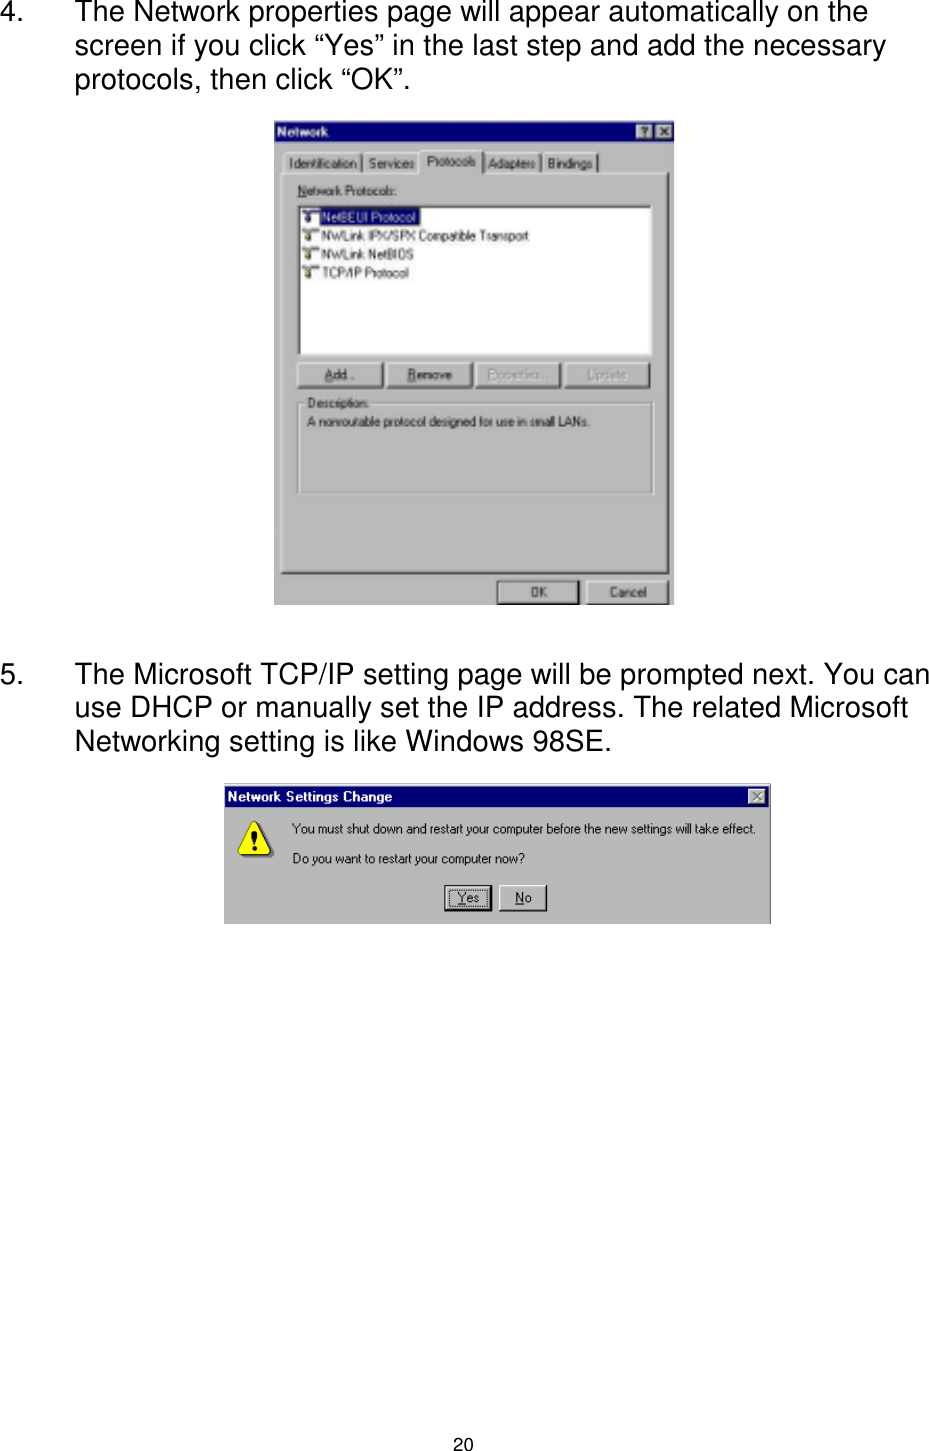  20 4.  The Network properties page will appear automatically on the screen if you click “Yes” in the last step and add the necessary protocols, then click “OK”.            5.  The Microsoft TCP/IP setting page will be prompted next. You can use DHCP or manually set the IP address. The related Microsoft Networking setting is like Windows 98SE.             